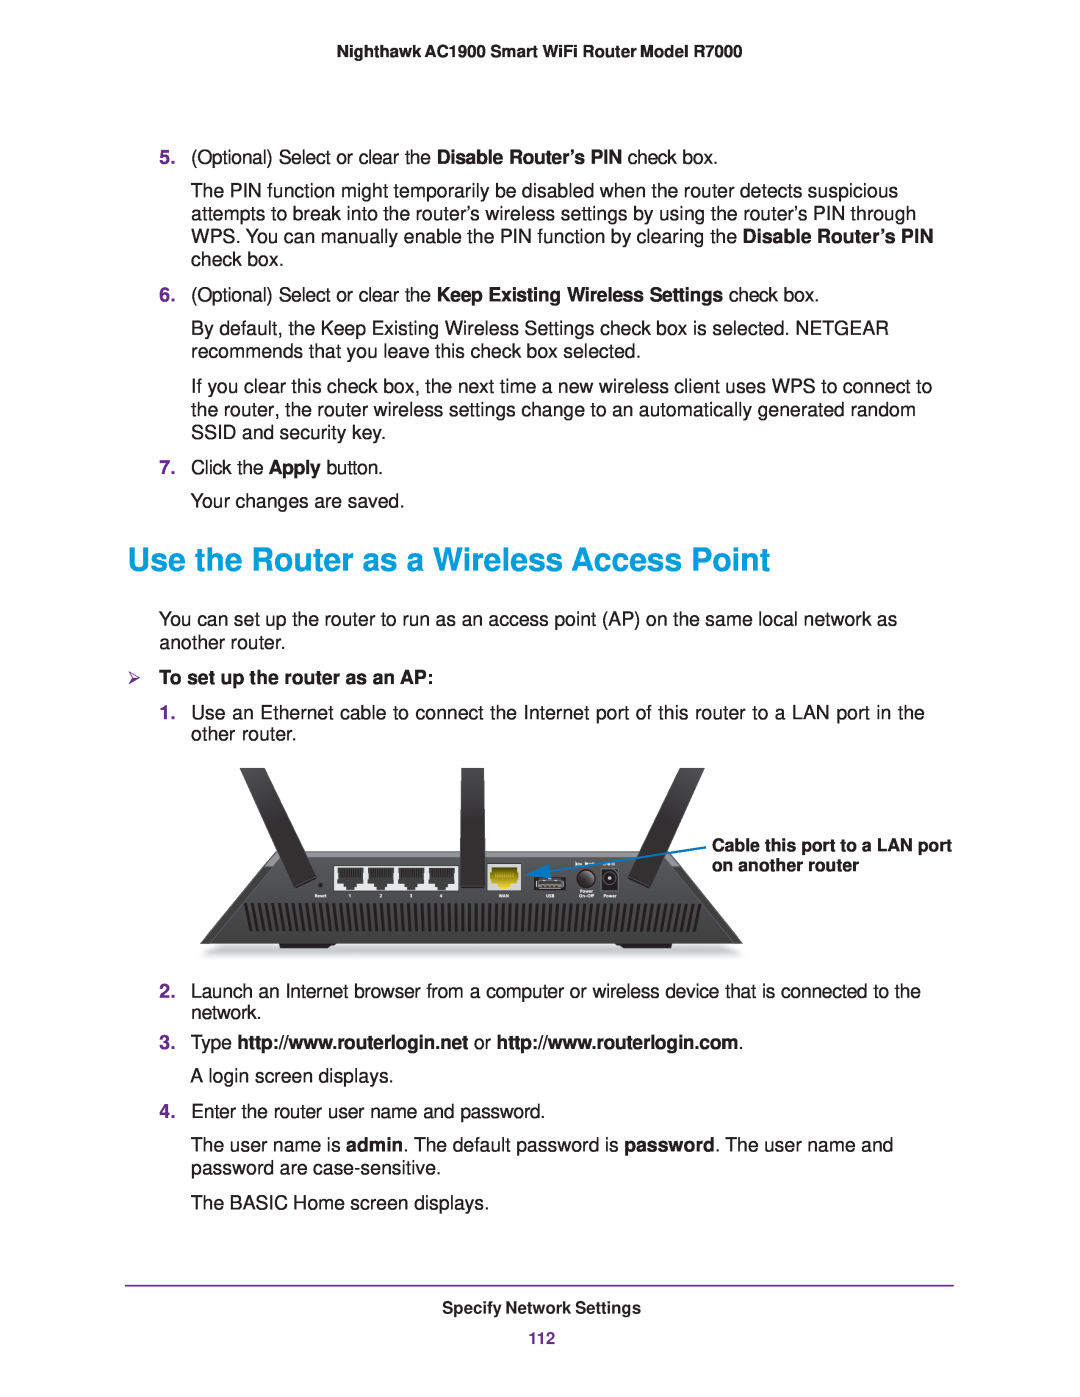 NETGEAR R7000 user manual Use the Router as a Wireless Access Point,  To set up the router as an AP 